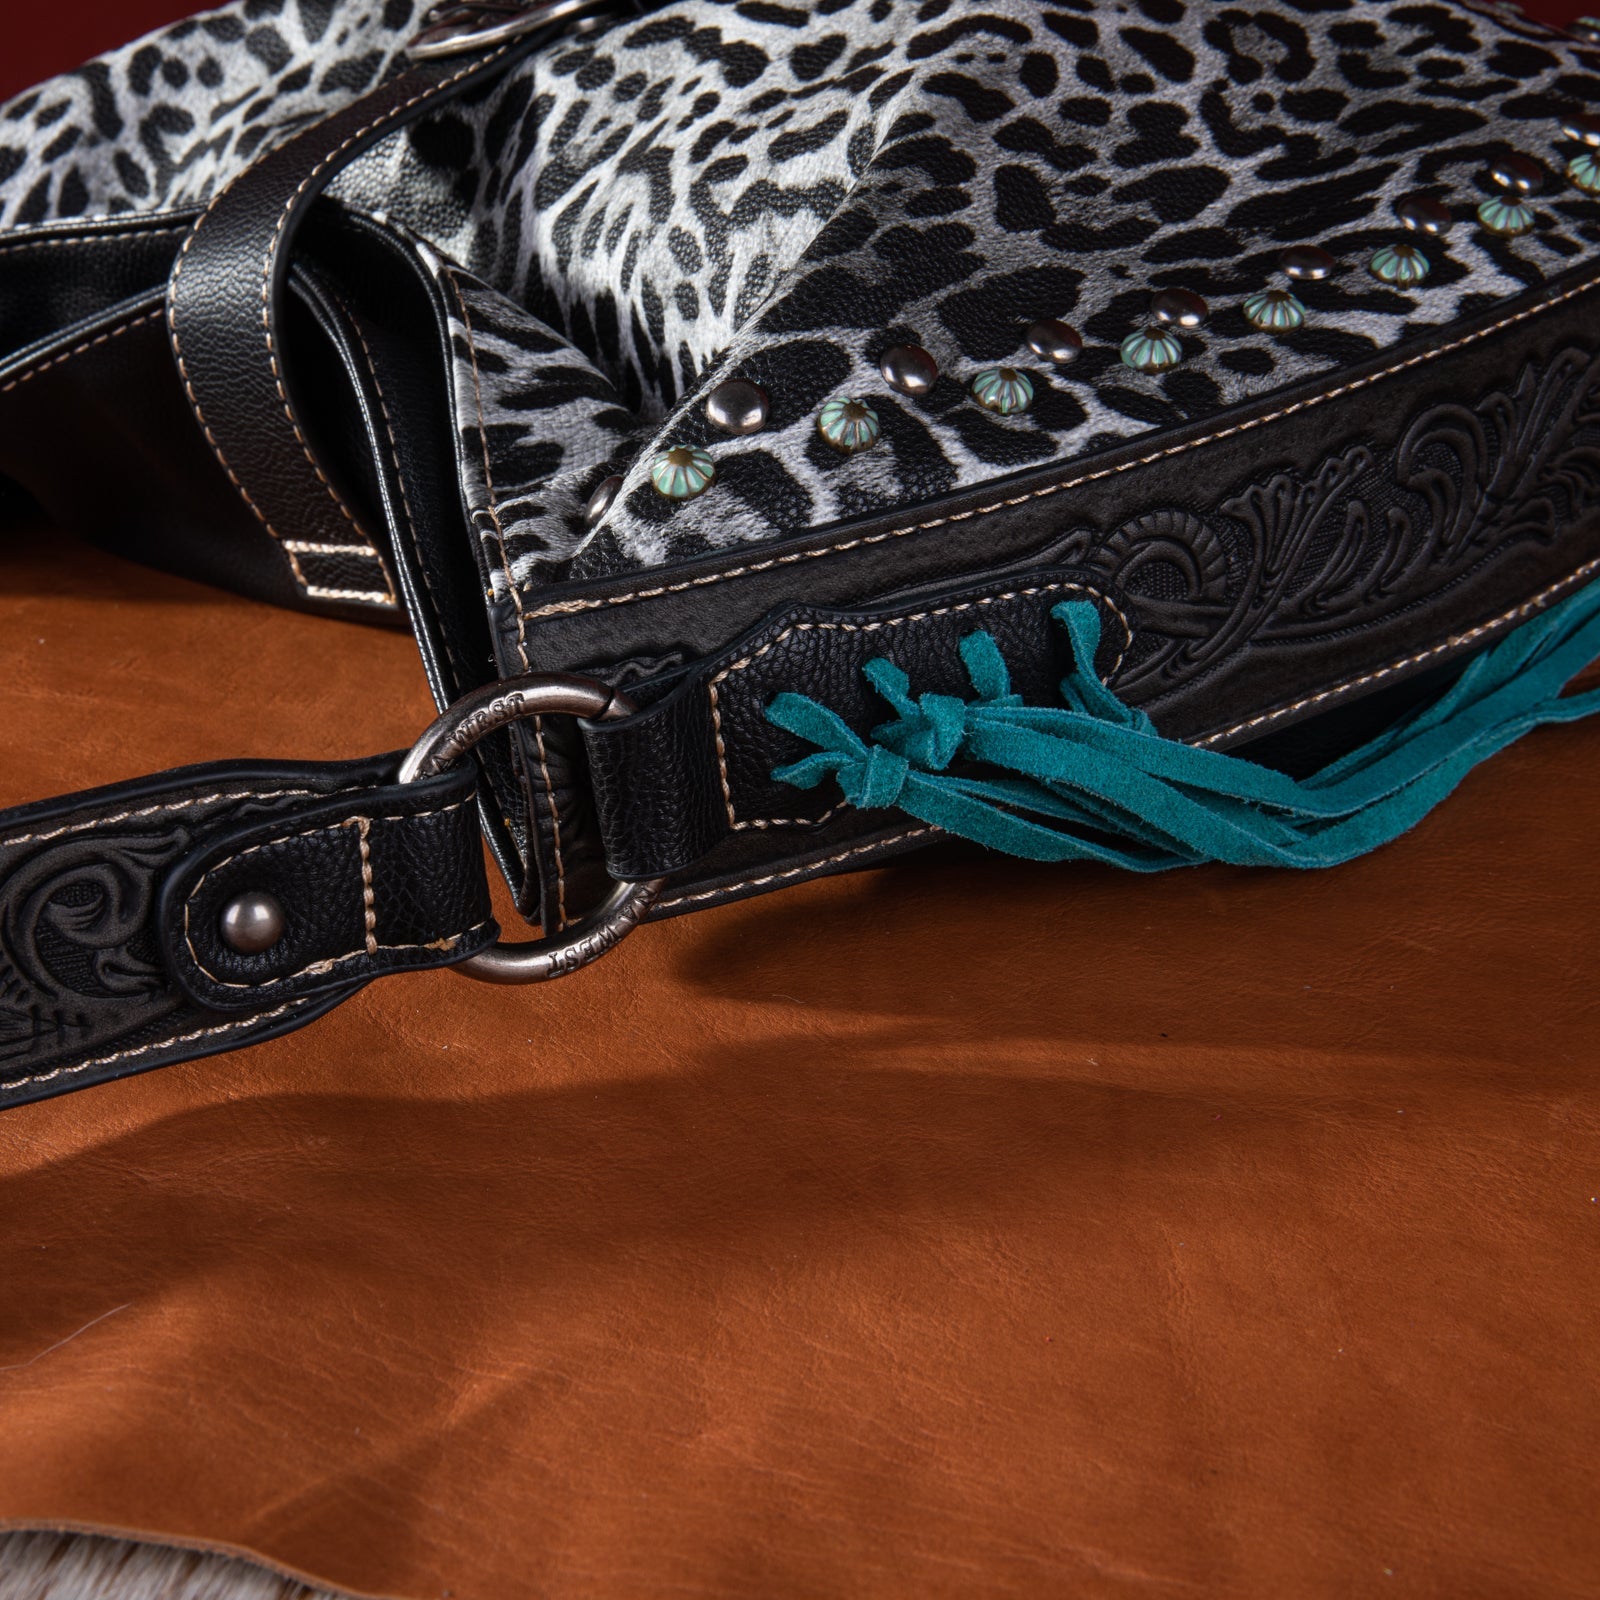 Montana West Leopard Buckle Concealed Carry Hobo - Montana West World